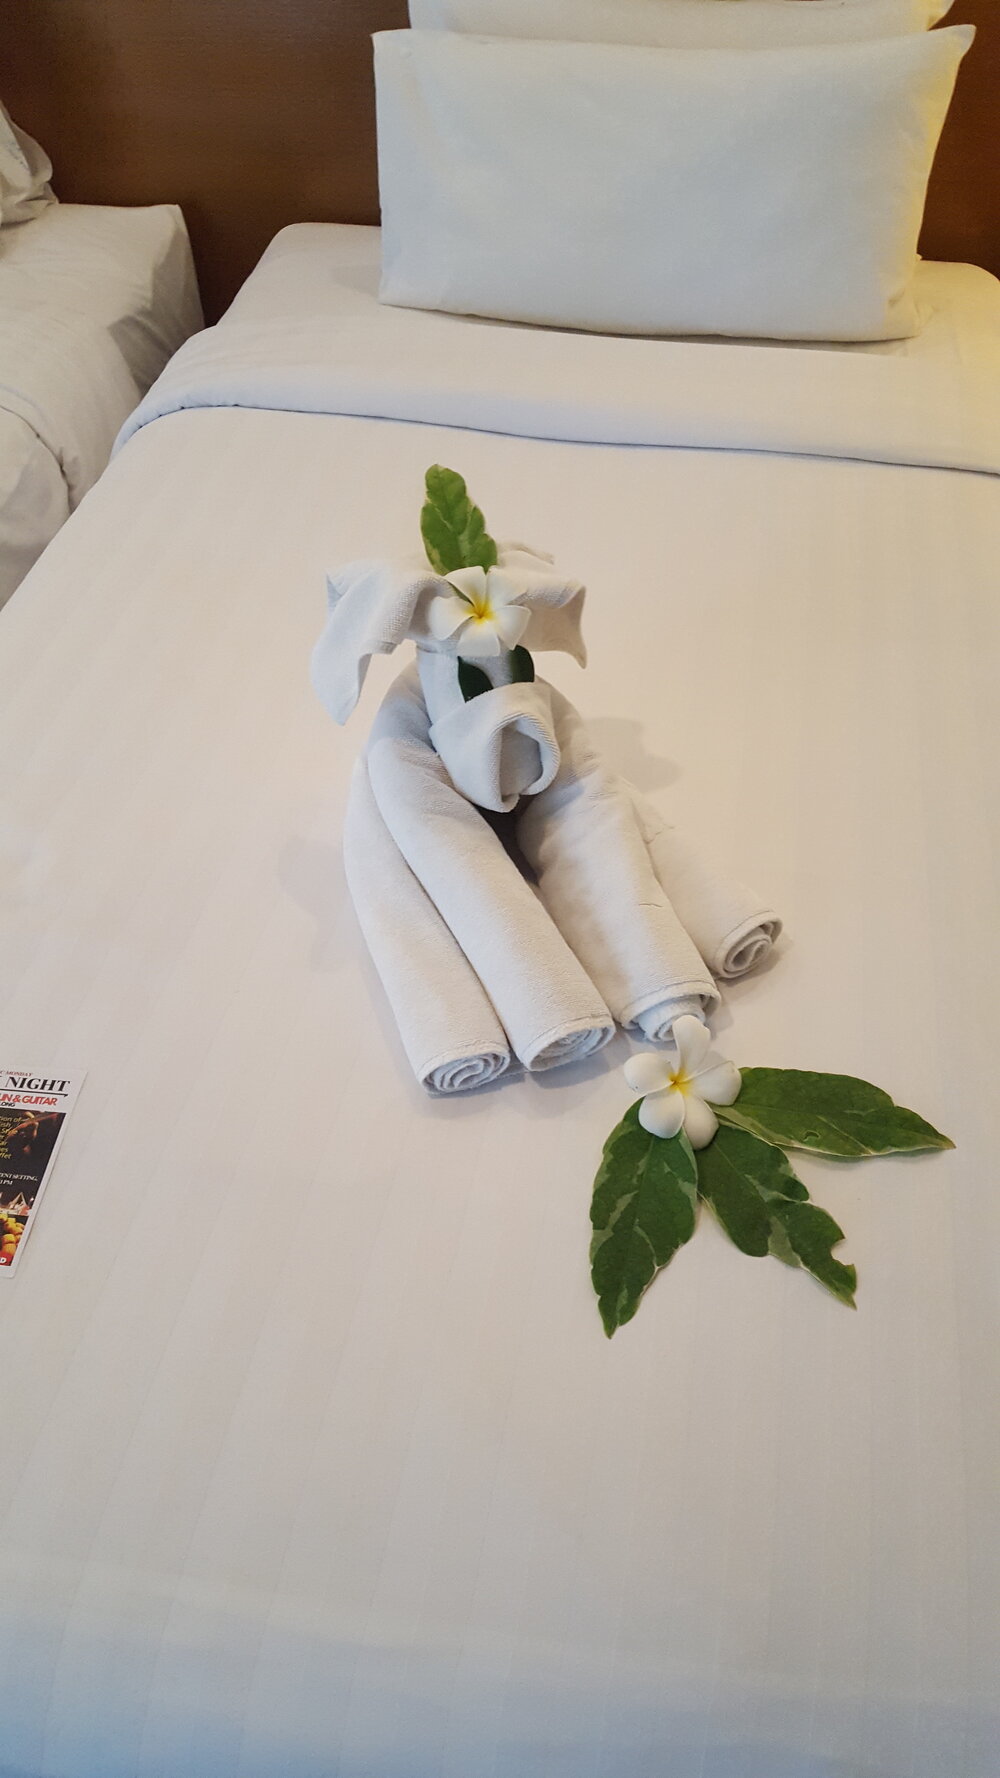 Cute towel decor to welcome us in the hotel room